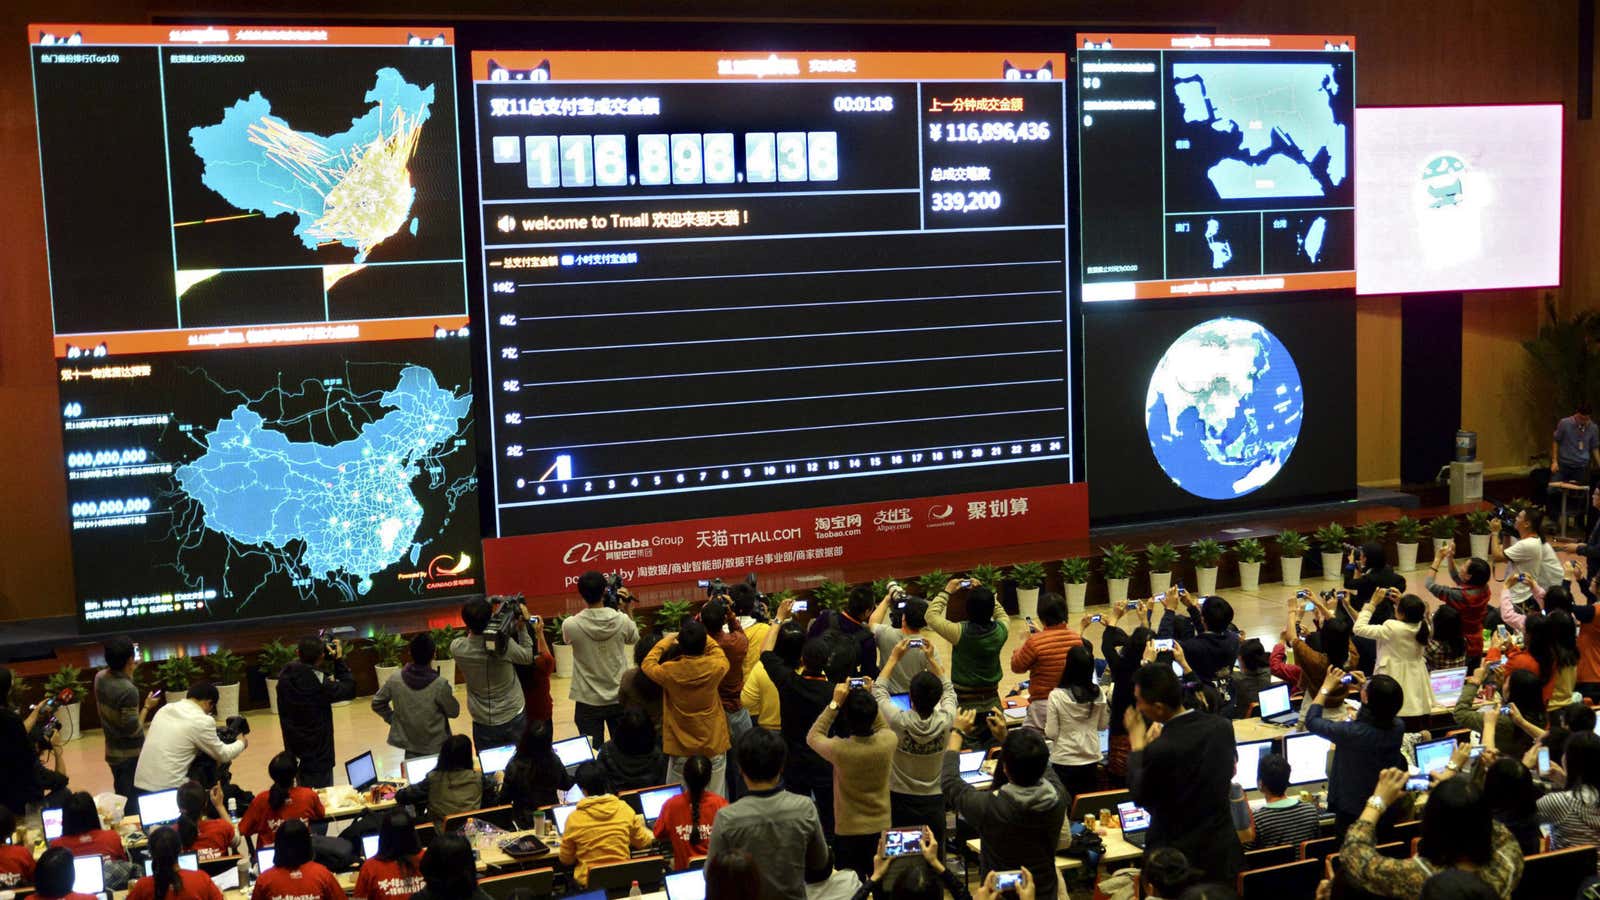 Journalists and employees track online transactions at Alibaba’s headquarters in Hangzhou.